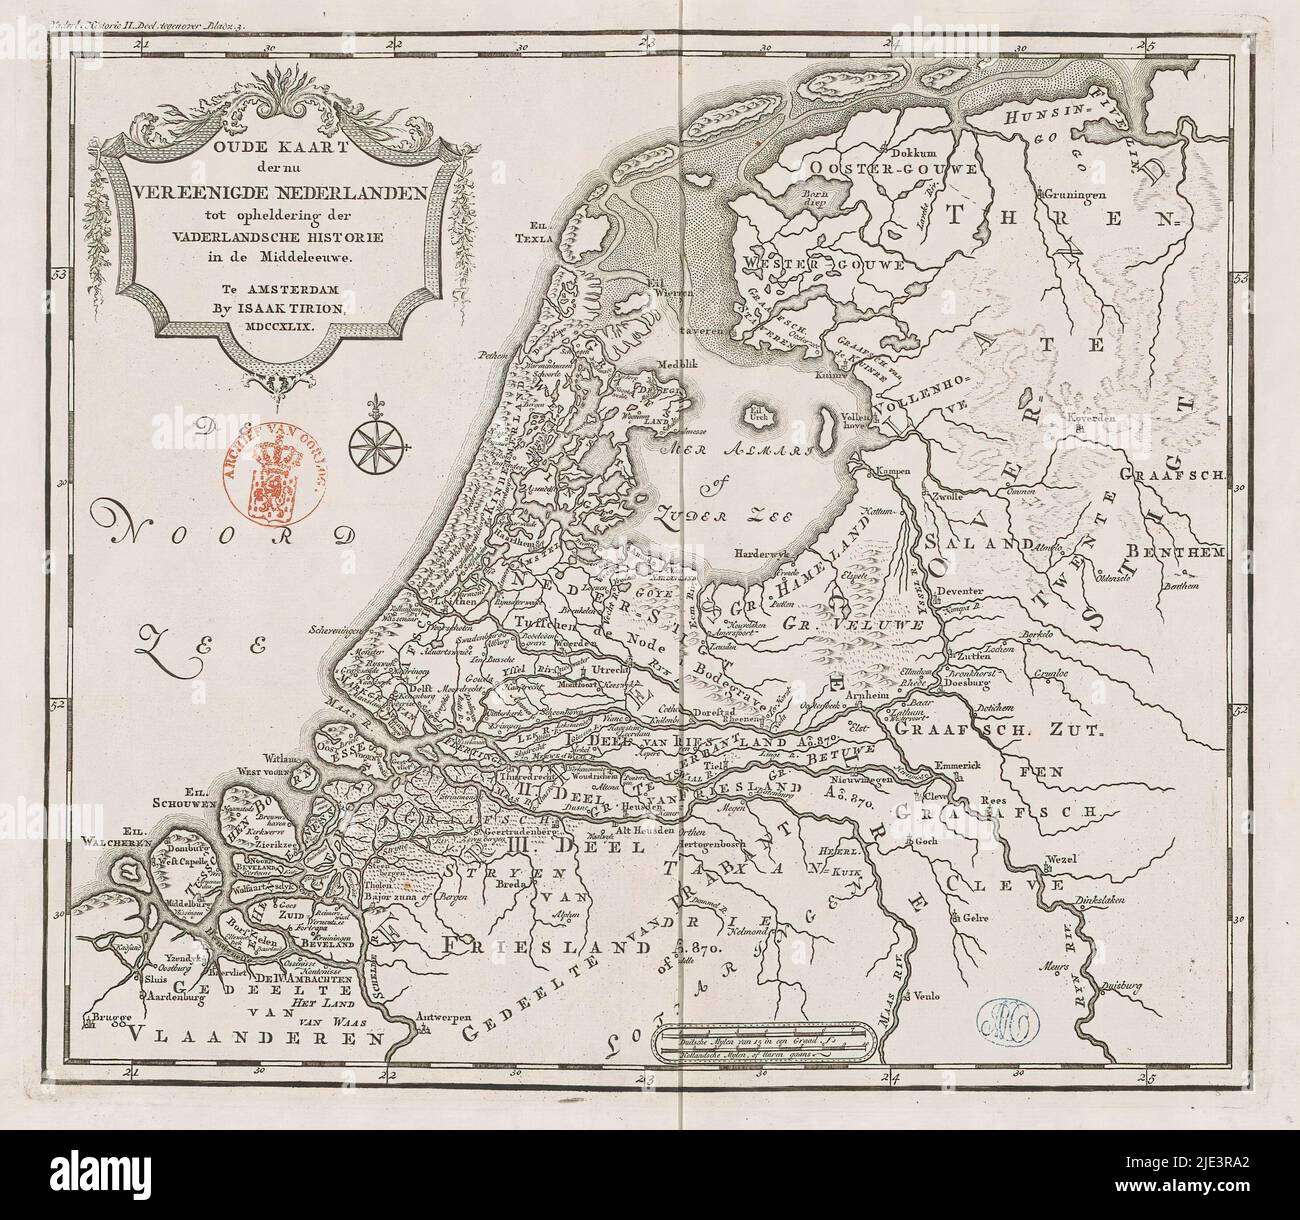 Historical map of Holland in the Middle Ages, Old map of the now united Netherlands to elucidate patriotic history in the Middle Ages (title on object), Eighteenth-century map of Holland in the Middle Ages. Title cartouche to the left. Right scale bar: German mylen of 15 in a degree, Dutch mylen or hours gaans. Degree divisions along edges., print maker: anonymous, publisher: Isaak Tirion, (mentioned on object), Amsterdam, 1749, paper, engraving, height 289 mm × width 329 mm Stock Photo